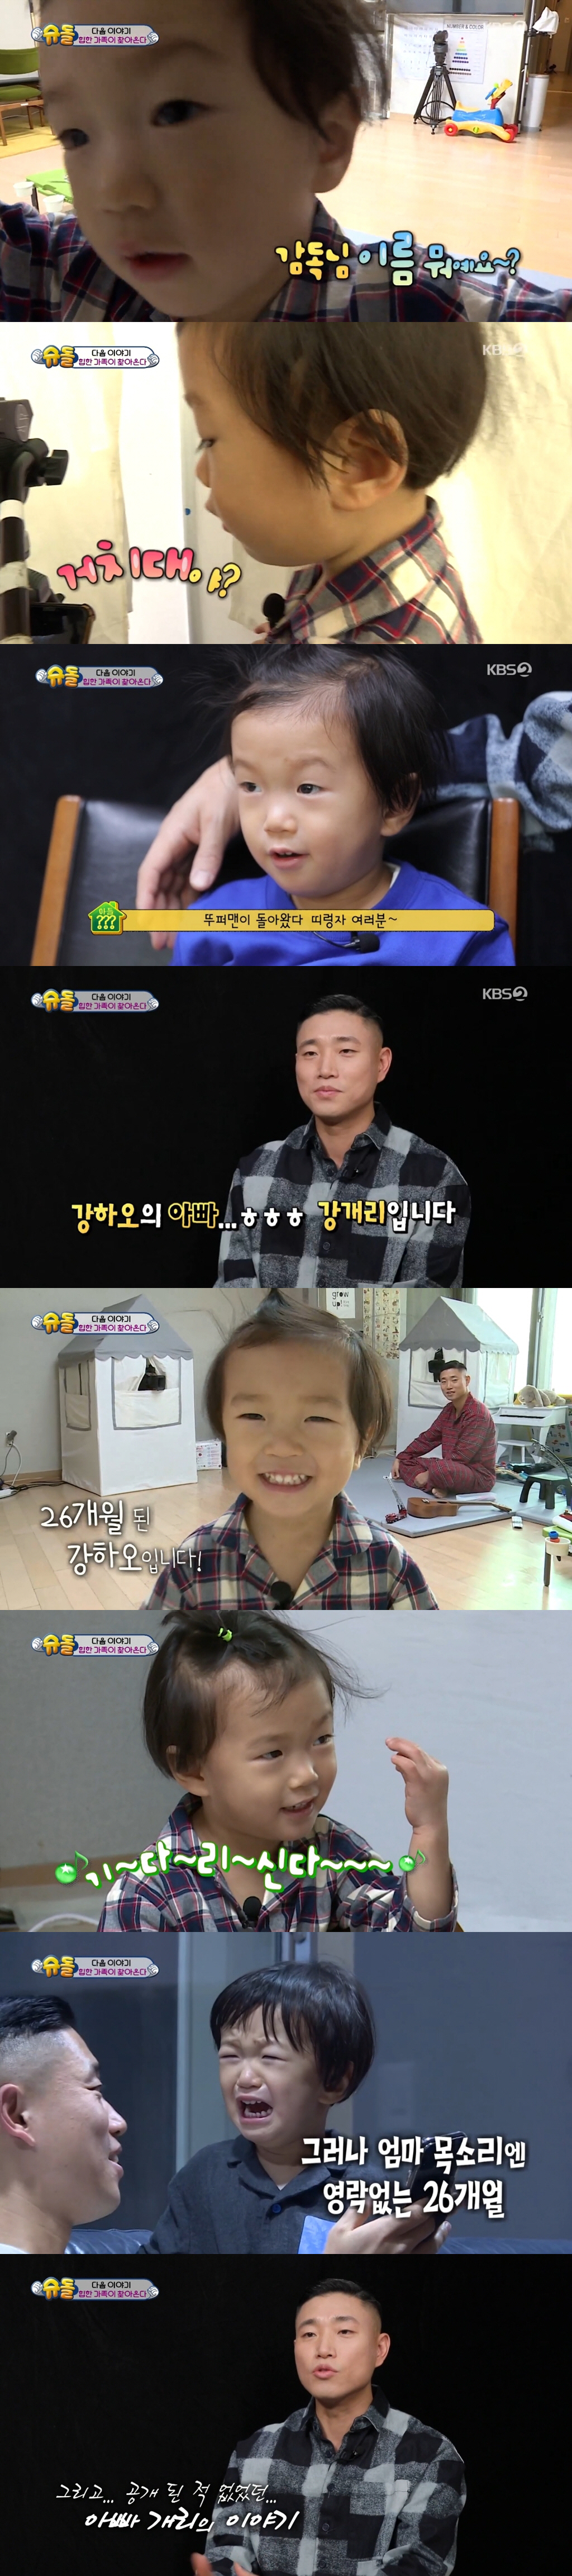 Lee Ssang Gary has joined the new family of KBS2s The The Return of Supermanhereinafter referred to as The Return of Superman).Gary first said his first greeting with 26 months son Hao on The Return of Superman broadcast on 27th, with Hao saying, Kevietto! Father wake up.The Return of Superman family, he said. Hao looked at the camera holder and said, What is this? Is it a cradle?I was surprised to show off all the affinity and vocabulary of the past.The Return of Superman viewers Hello.I am Kang Hao, and when asked about the name of Father, he showed a brilliant answer to Kang Hee-gun .Here, he showed a cute charm and musical talent that resembles Father, and foresaw the appearance of a baby of the past.The announcement of the appearance of these rich people was 12.6% per minute (Nilson Korea), marking the best minute of The Return of Superman.I think its been over three years, Ive been a bit out of everything, Ive been thinking a lot about (the appearance), Gary said.But the way he looks at Garys appearance in The Return of Superman is not as fine: the child is cute and lovely, but public opinion about Gary is not so good.He will also do that, Gary got off at SBS Running Man in 2016 and then announced the surprise marriage news on SNS in April 2017.But there was a noise in the process.It was pointed out that even the members of Running Man who have been together for many years as well as the Lee family member have reported Garys marriage news to SNS.At that time, Running Man also indirectly expressed regret that Gary changed his phone number and could not contact him at present.Gary, who left the broadcast and colleagues, announced the news of his birth on SNS in six months of marriage.And she told YouTube in 2018 that she has been a celebrity for 20 years and has been on the air to heal her under extreme stress.Gary, who had been doing so, was returning to the air with son this time, so the publics gaze on it could not be fixed.Attention is focused on whether Gary can overturn cold public opinion through The Return of Superman.